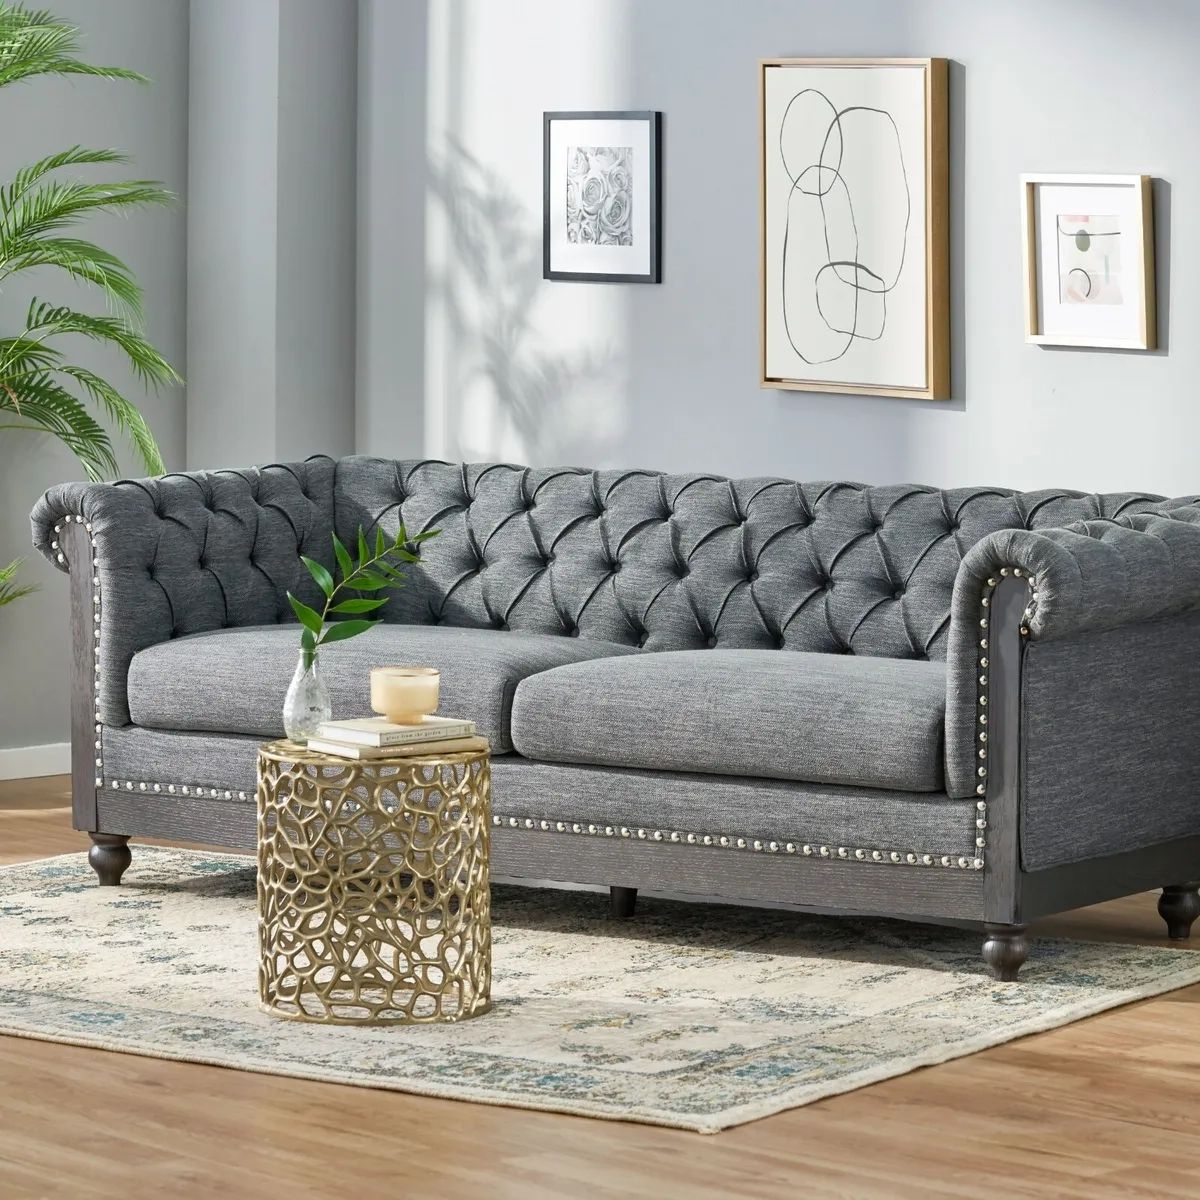 Kinzie Chesterfield Tufted Fabric 3 Seater Sofa With Nailhead Trim | Ebay Intended For Sofas With Nailhead Trim (View 9 of 15)